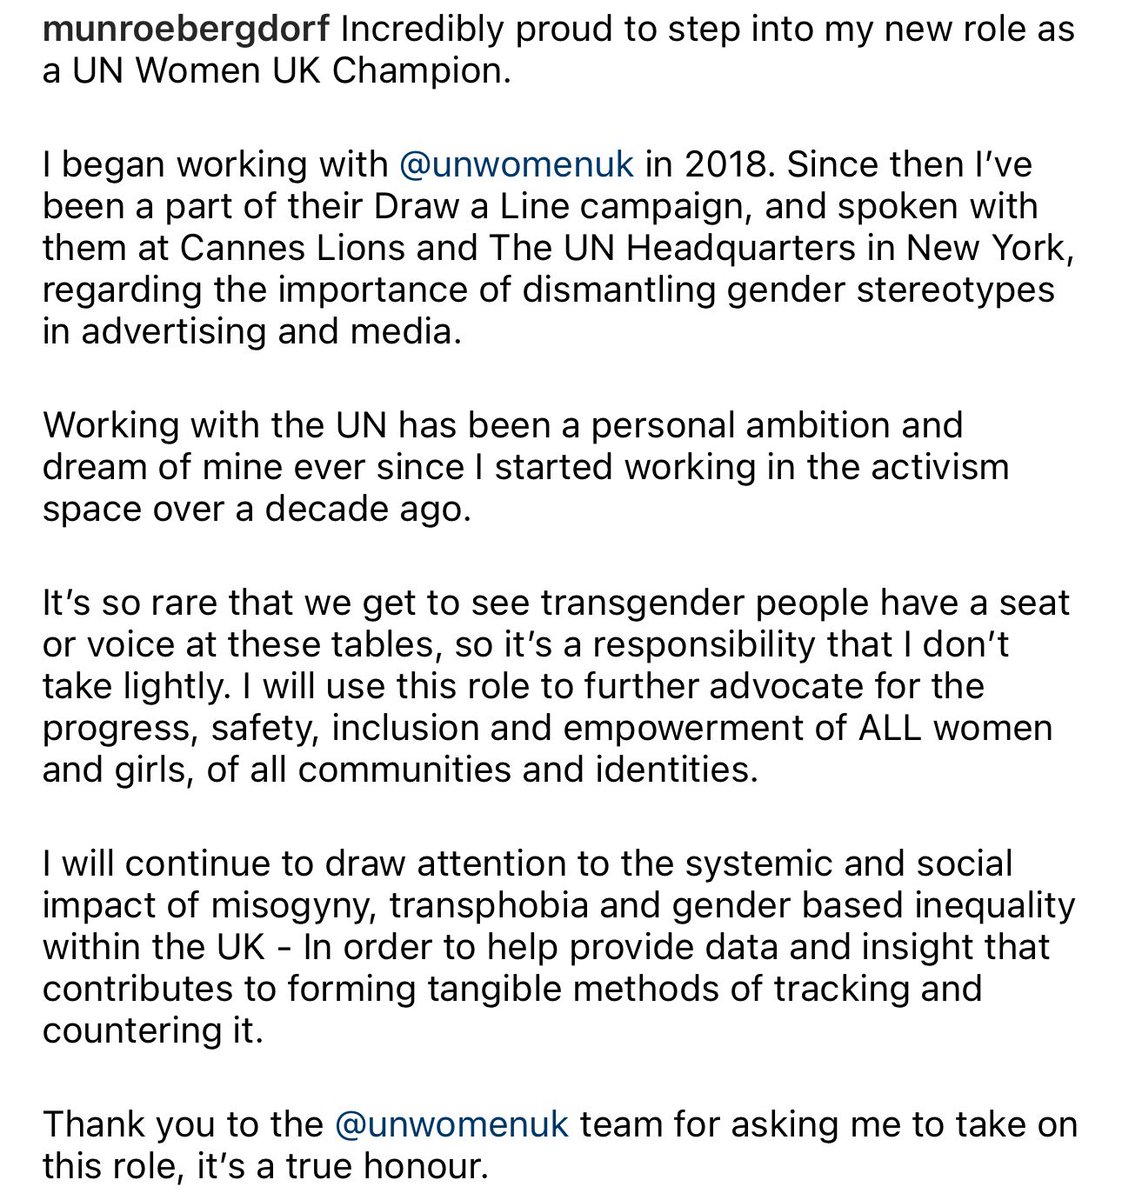 You can’t make this up. @UNWomenUK named Munroe Bergdorf as a UN Women Champion. Munroe is a male.

In his new role, he will fight against misogyny, gender based inequality, and for the empowerment & inclusion of women. He says this as a man pretending to be a woman, taking a